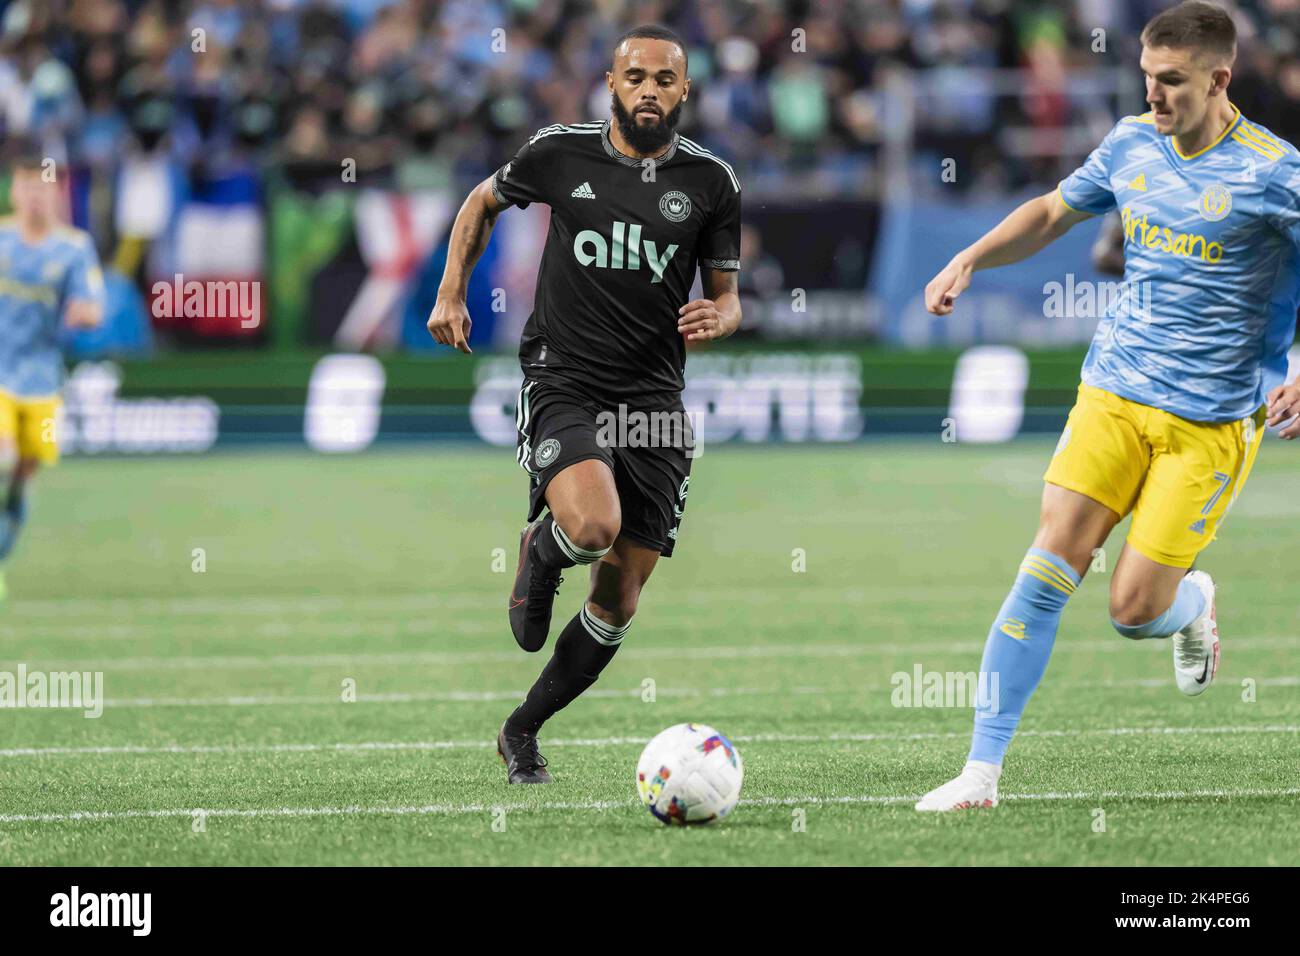 Charlotte, North Carolina, USA. 1st Oct, 2022. Philadelphia Union Forward MIKAEL UHRE (DEN) plays against the Charlotte FC at the Bank of America Stadium in Charlotte, North Carolina, USA. The Charlotte FC goes on to win the match 4-0. (Credit Image: © Walter G. Arce Sr./ZUMA Press Wire) Stock Photo